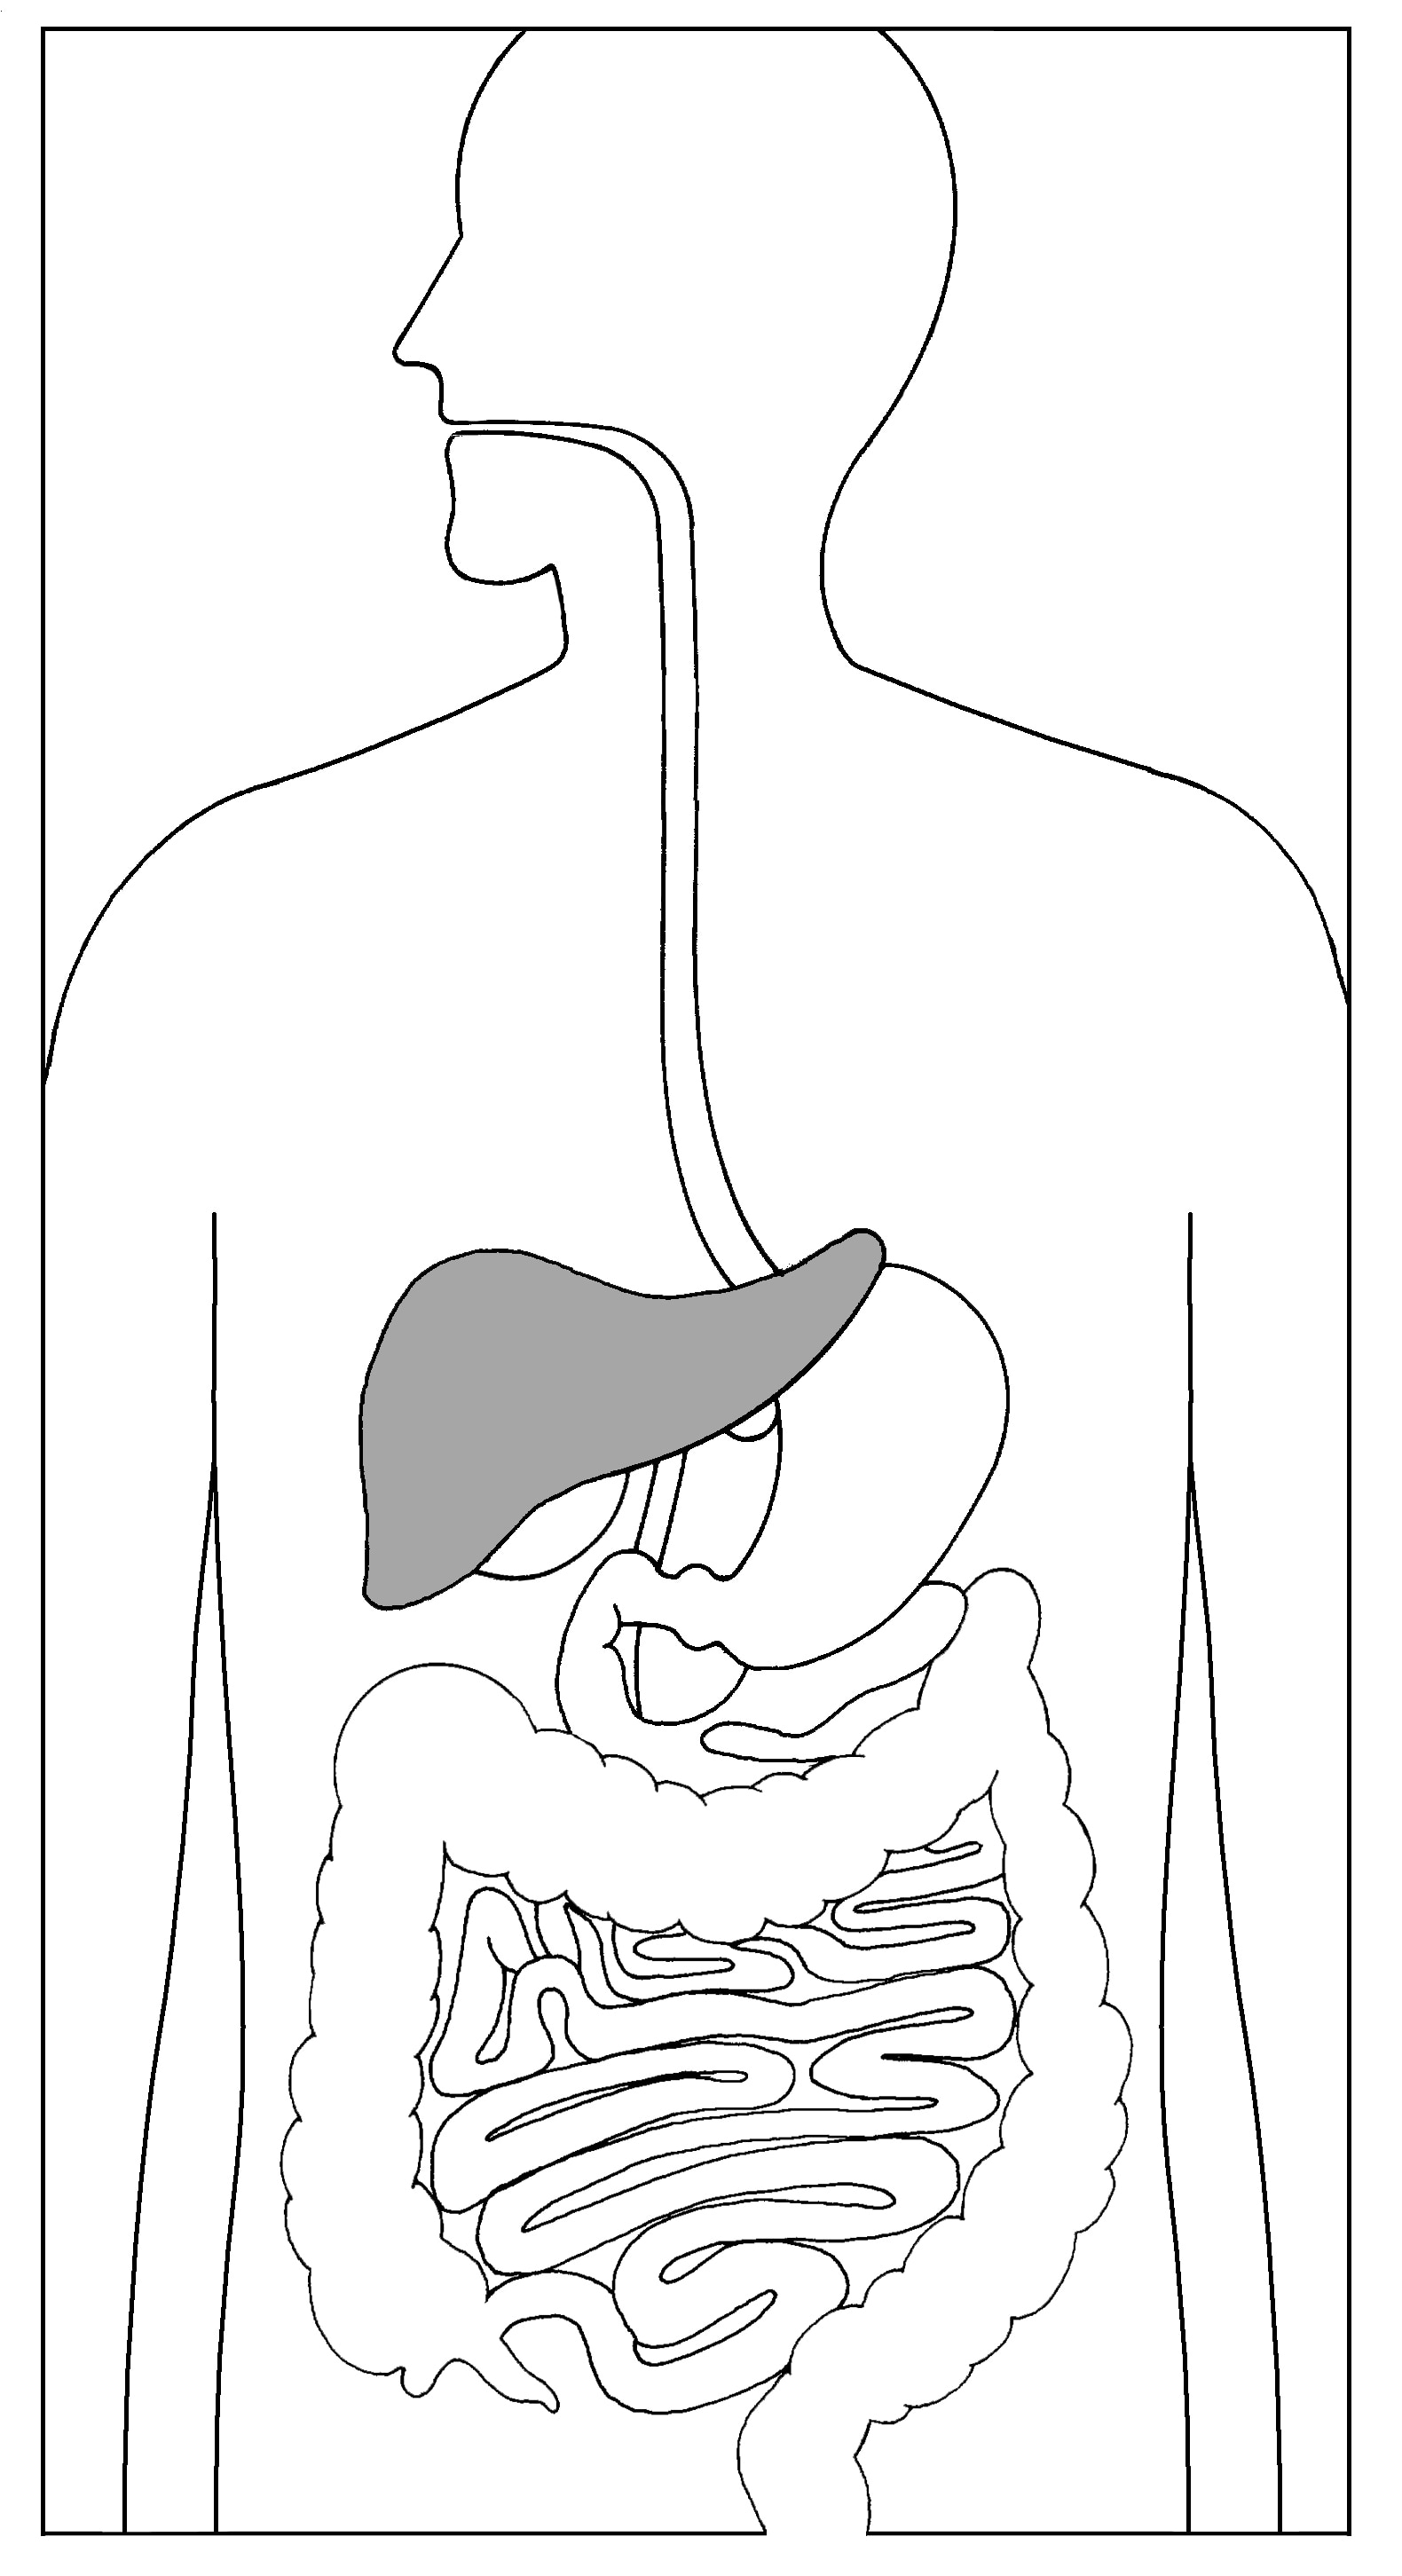 Digestive System Coloring page | Digestive system, Human digestive system,  Body systems